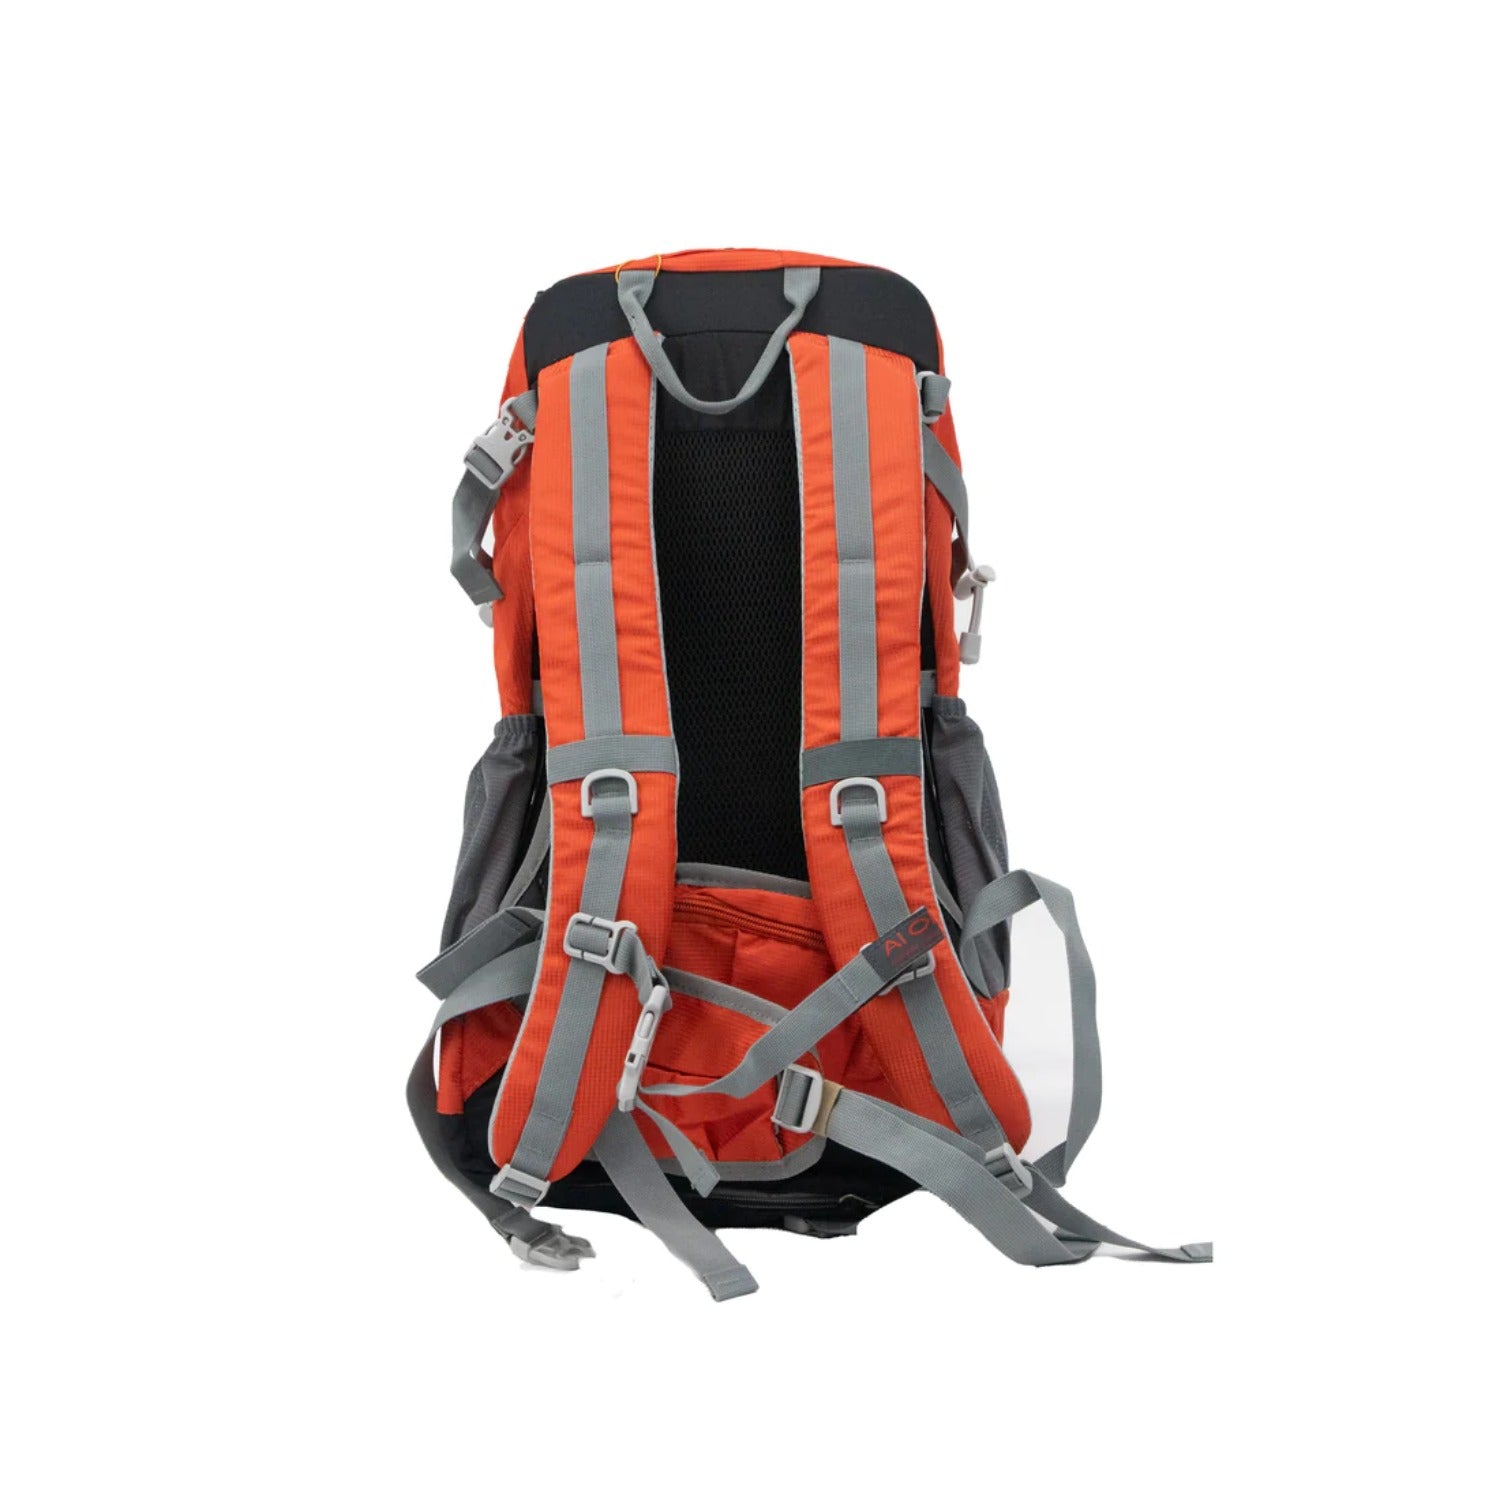 Buy Pro Trekking Backpack 25 Ltr at Gokyo Outdoor Clothing & Gear